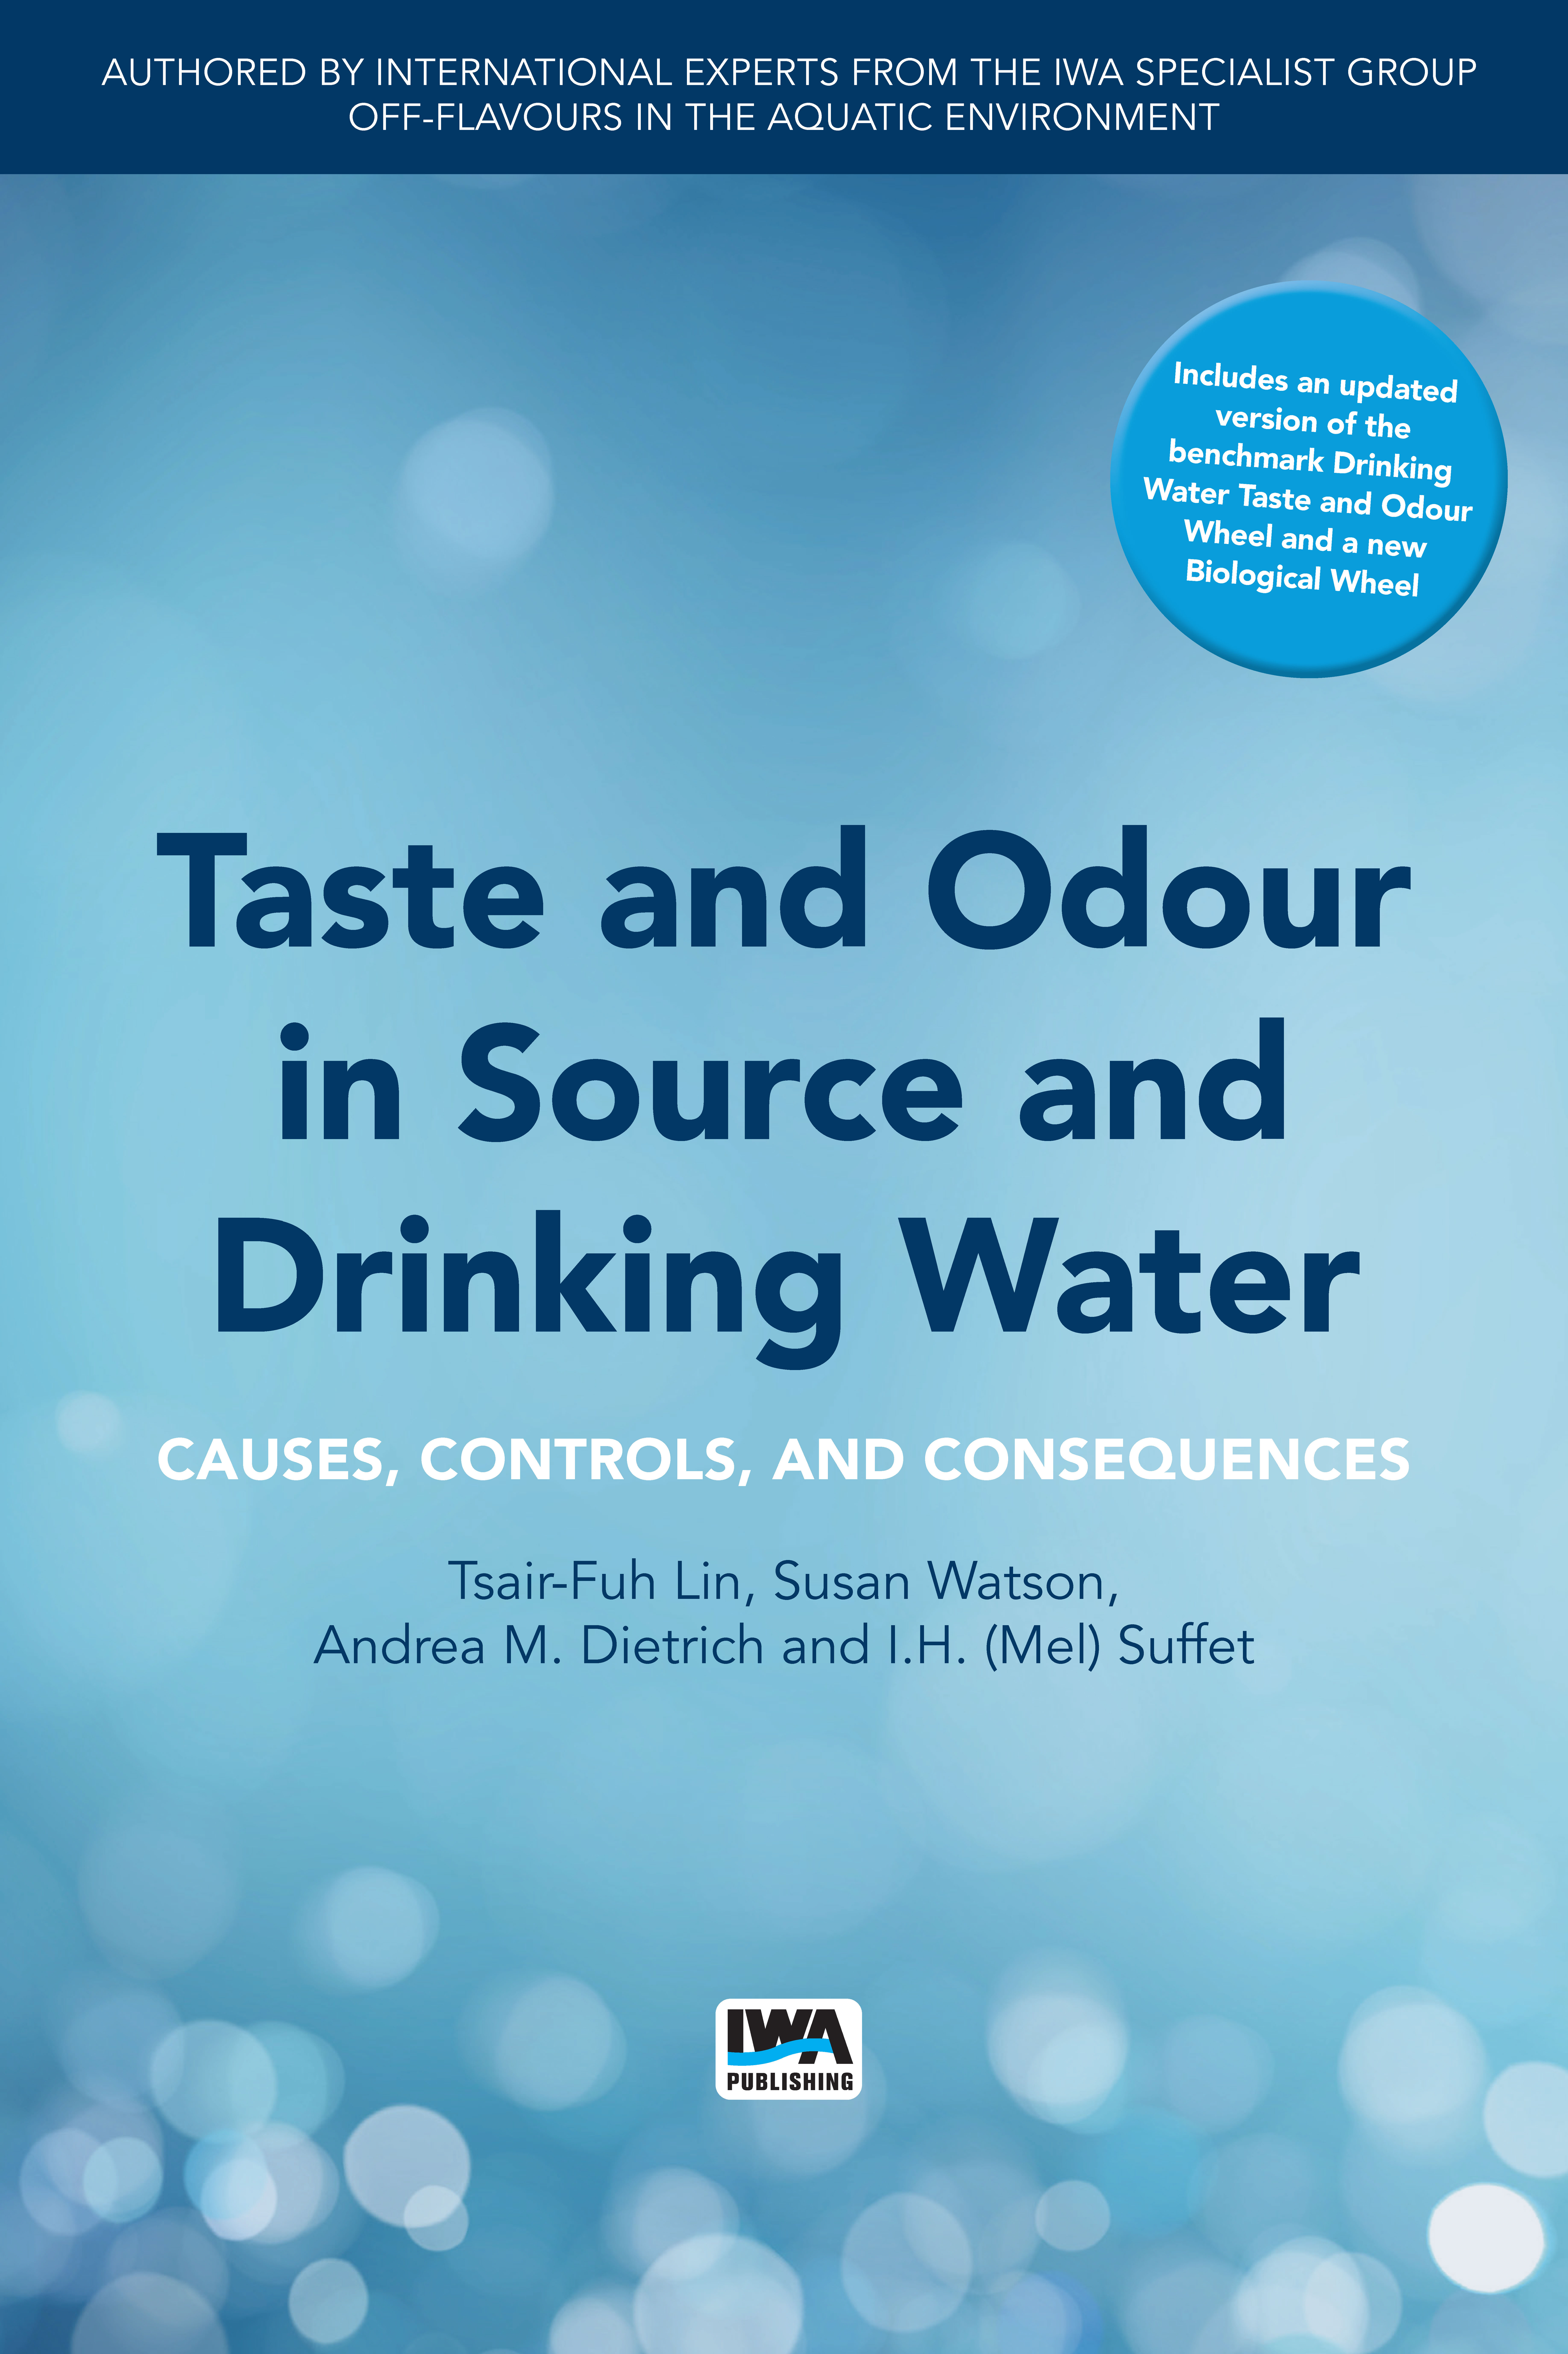 "Taste and Odour in Source and Drinking Water: Causes, Controls, and Consequences" book cover